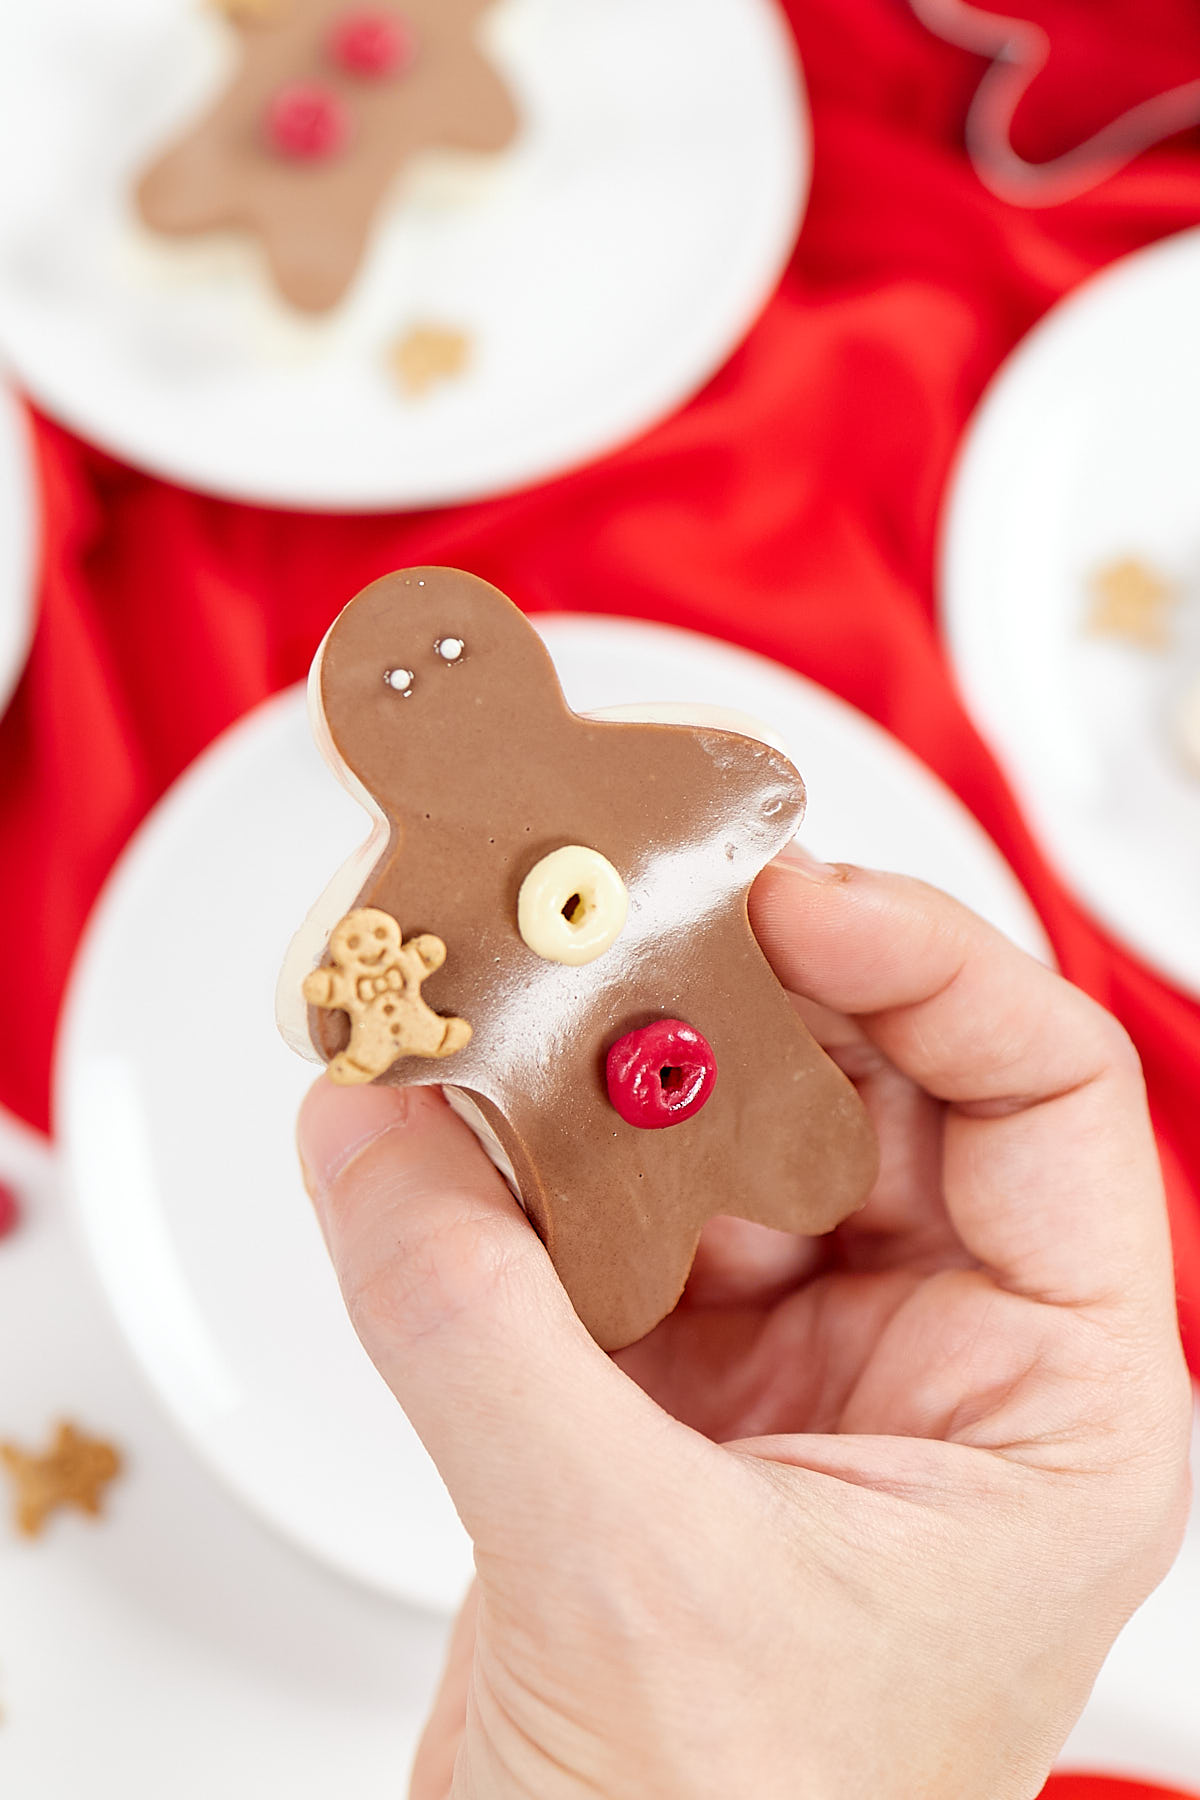 Gingerbread man jello jiggler with gingerbread sprinkle on hand.